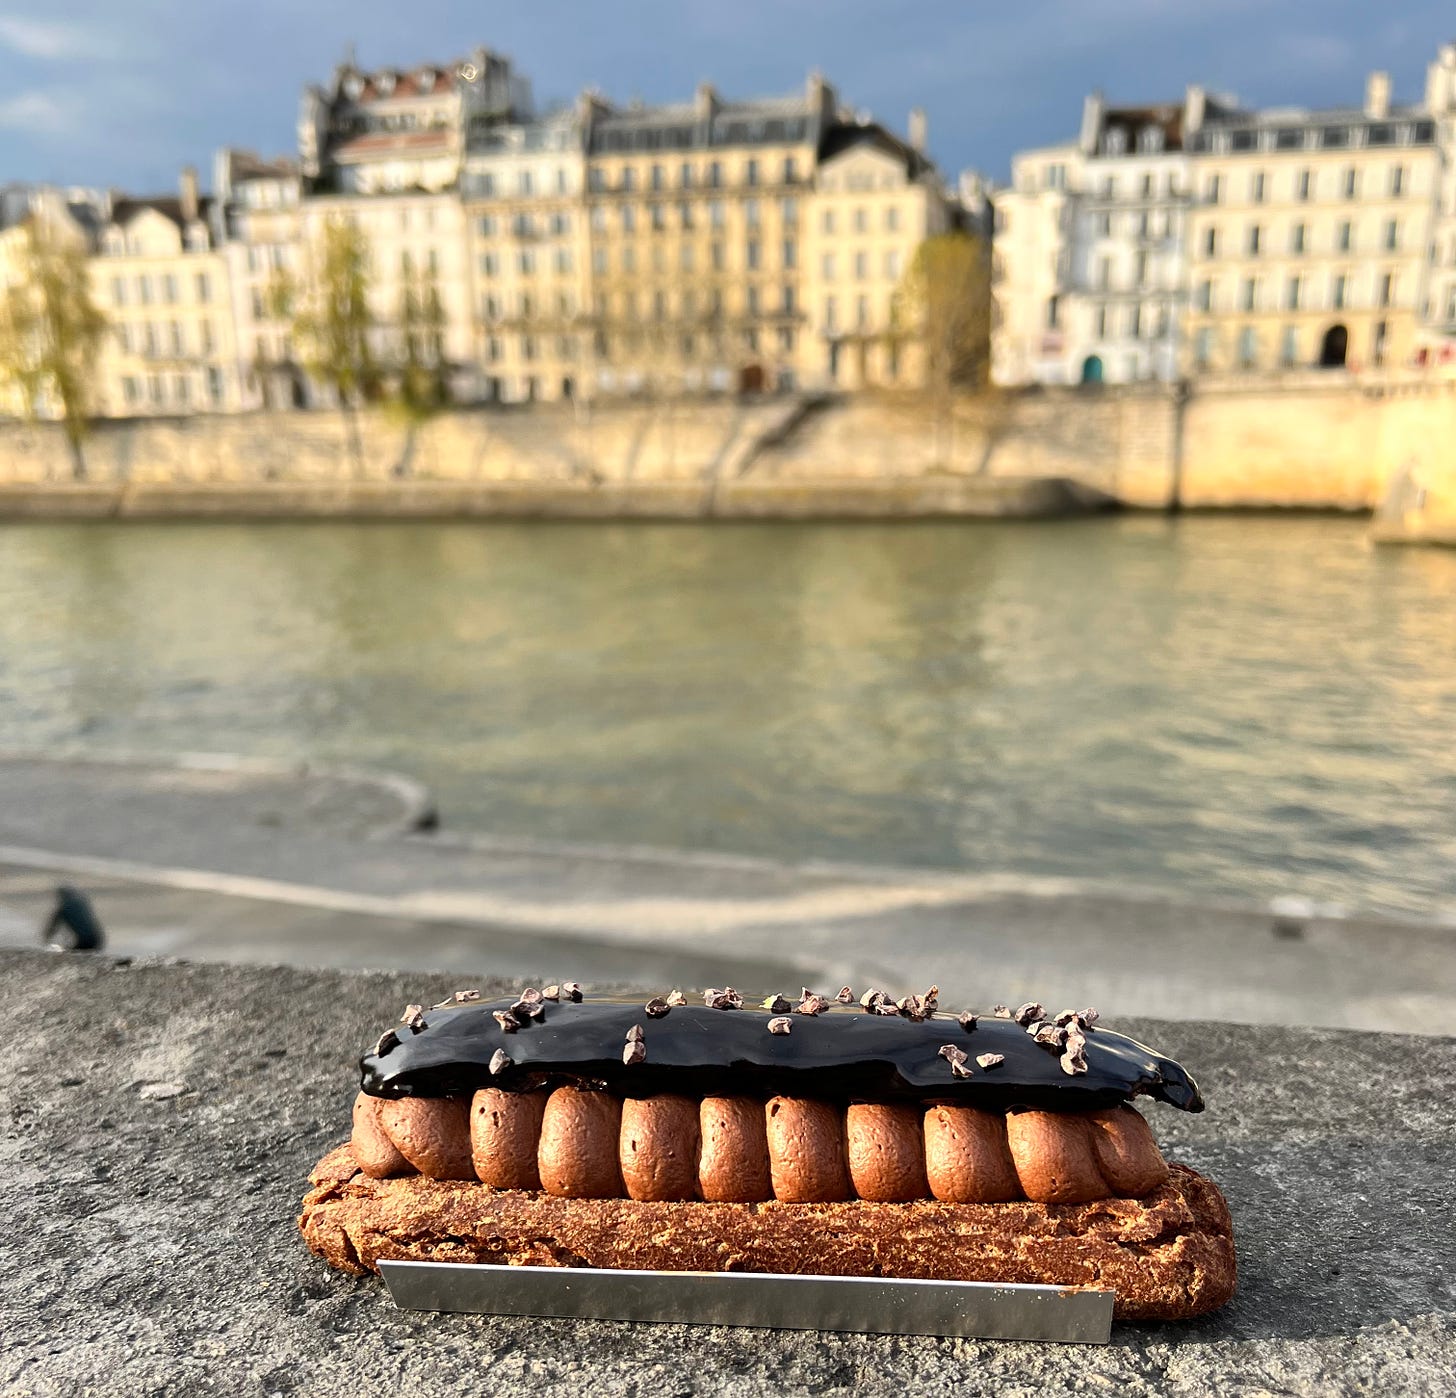 Our favorite pastry shops in Paris